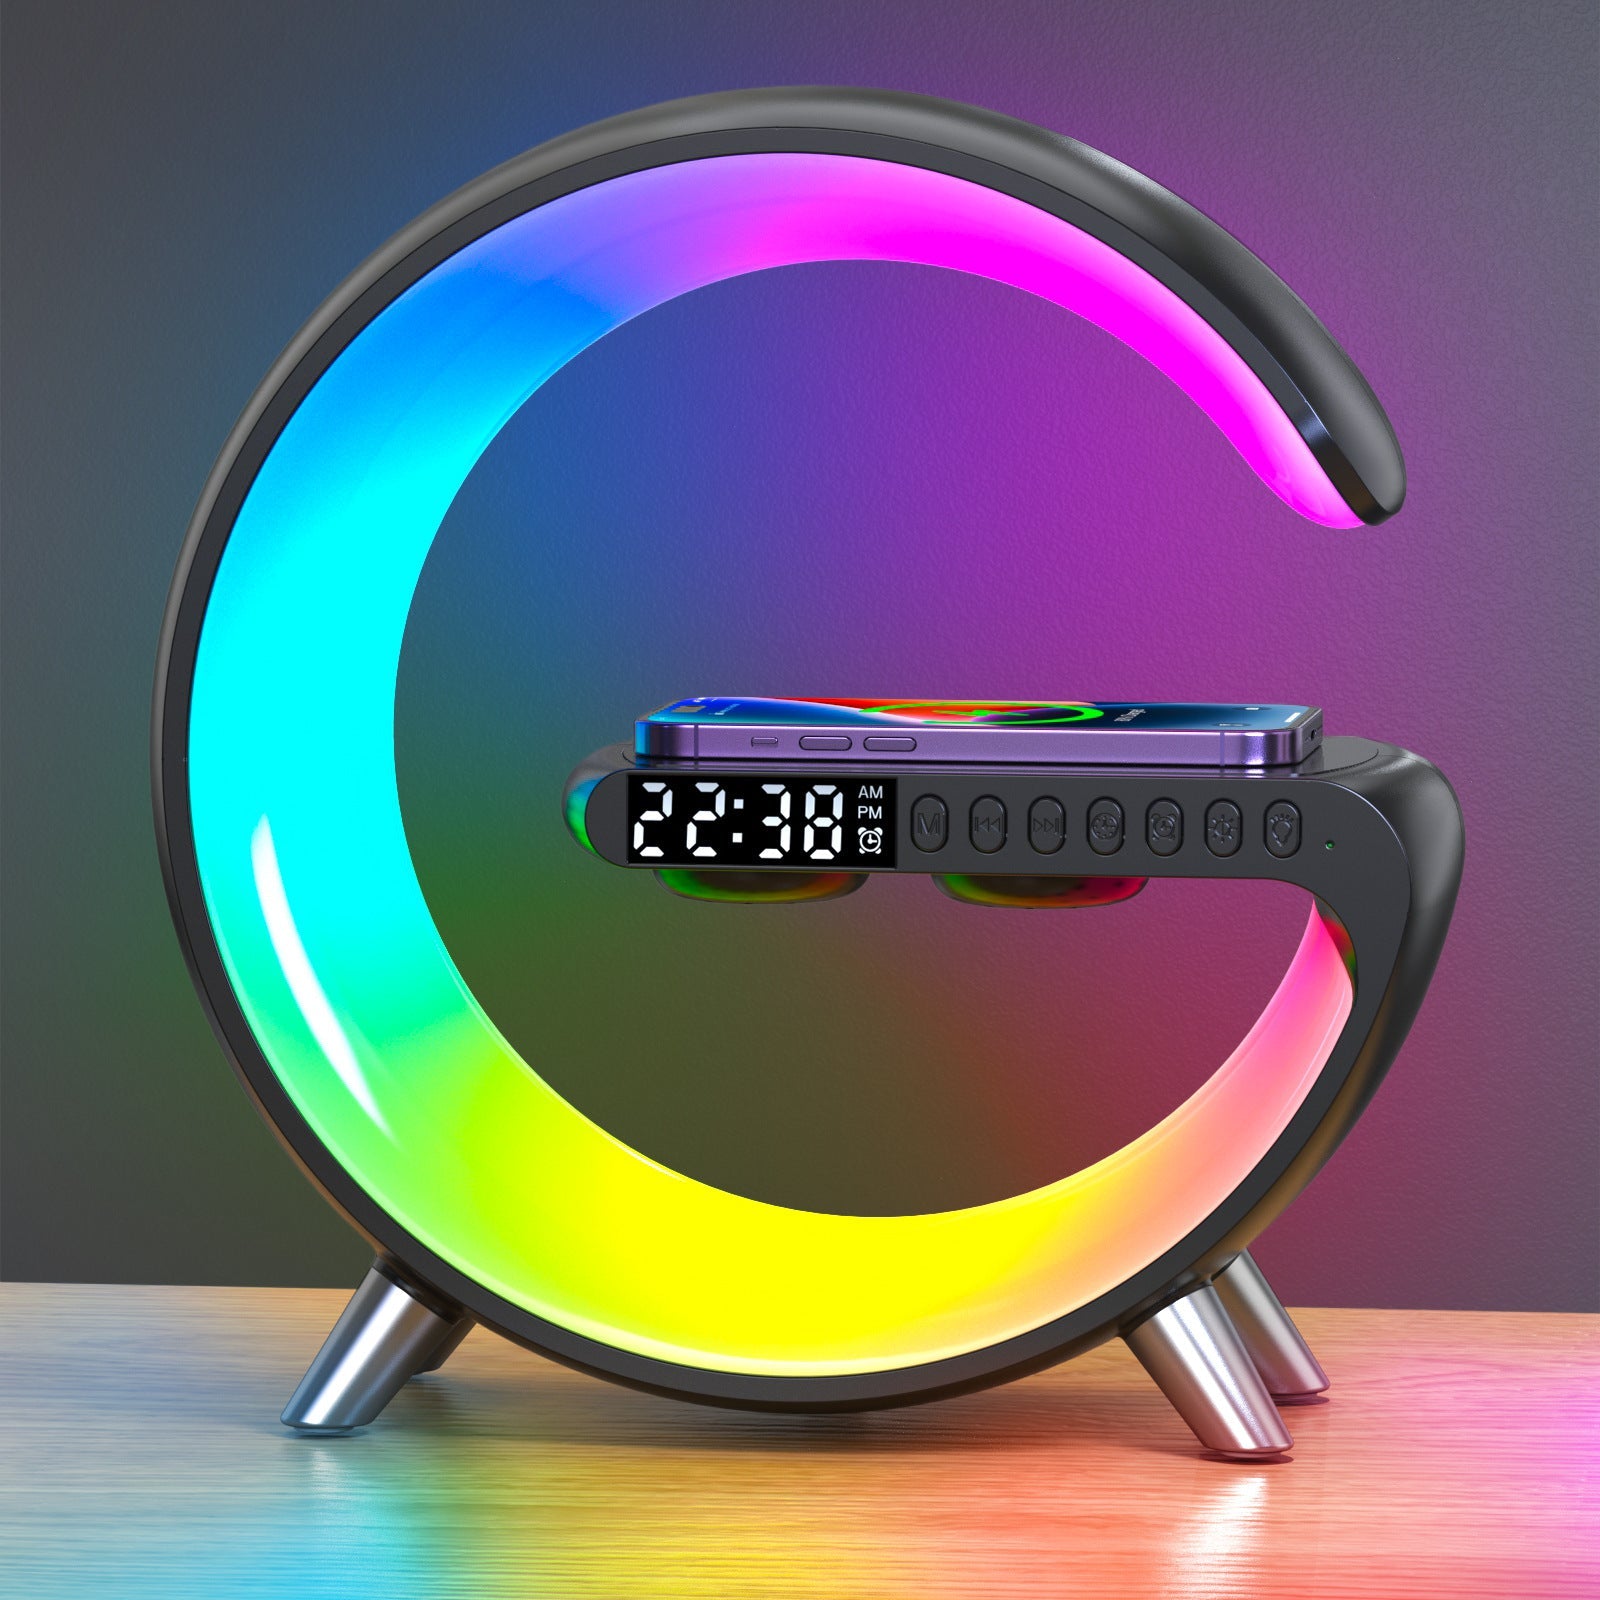  Mooncave Light Wireless Charger And Speaker With Clock by VistaShops VistaShops Perfumarie